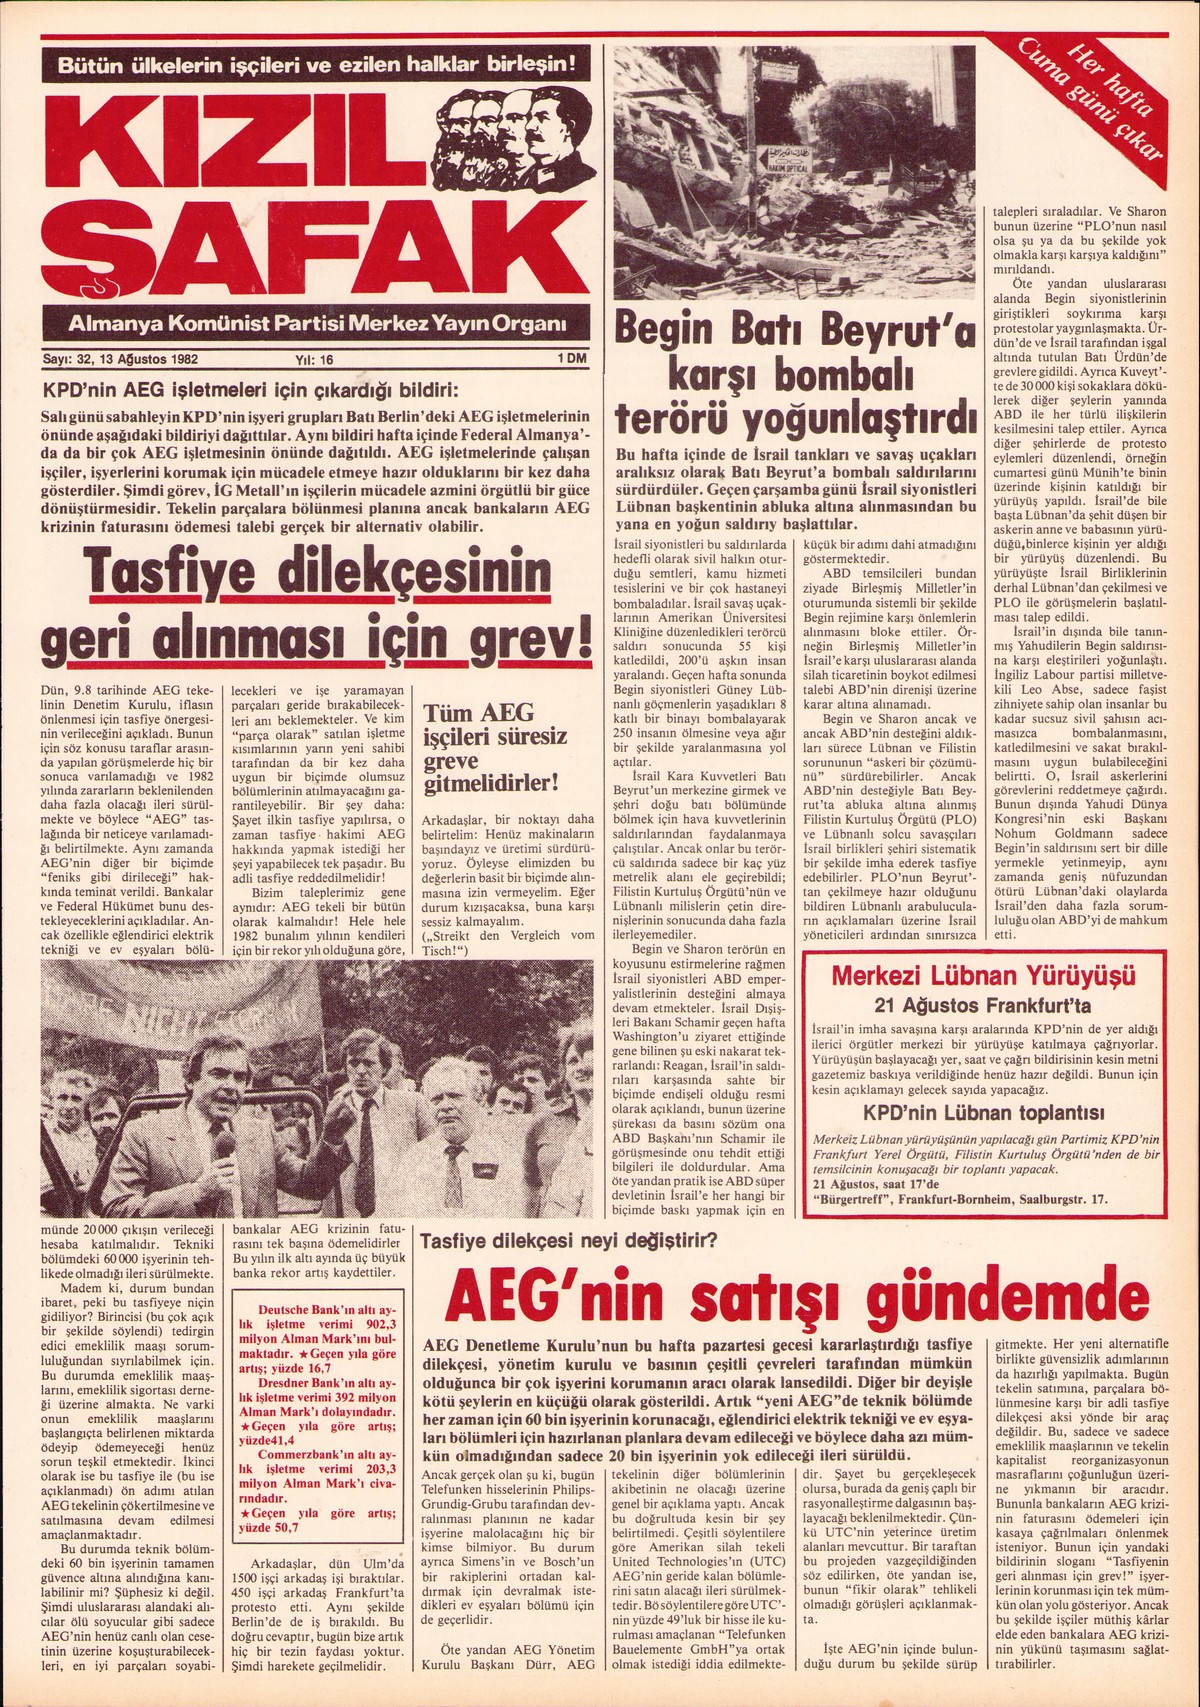 Roter Morgen, 16. Jg., 13. August 1982, Nr. 32, Seite 14